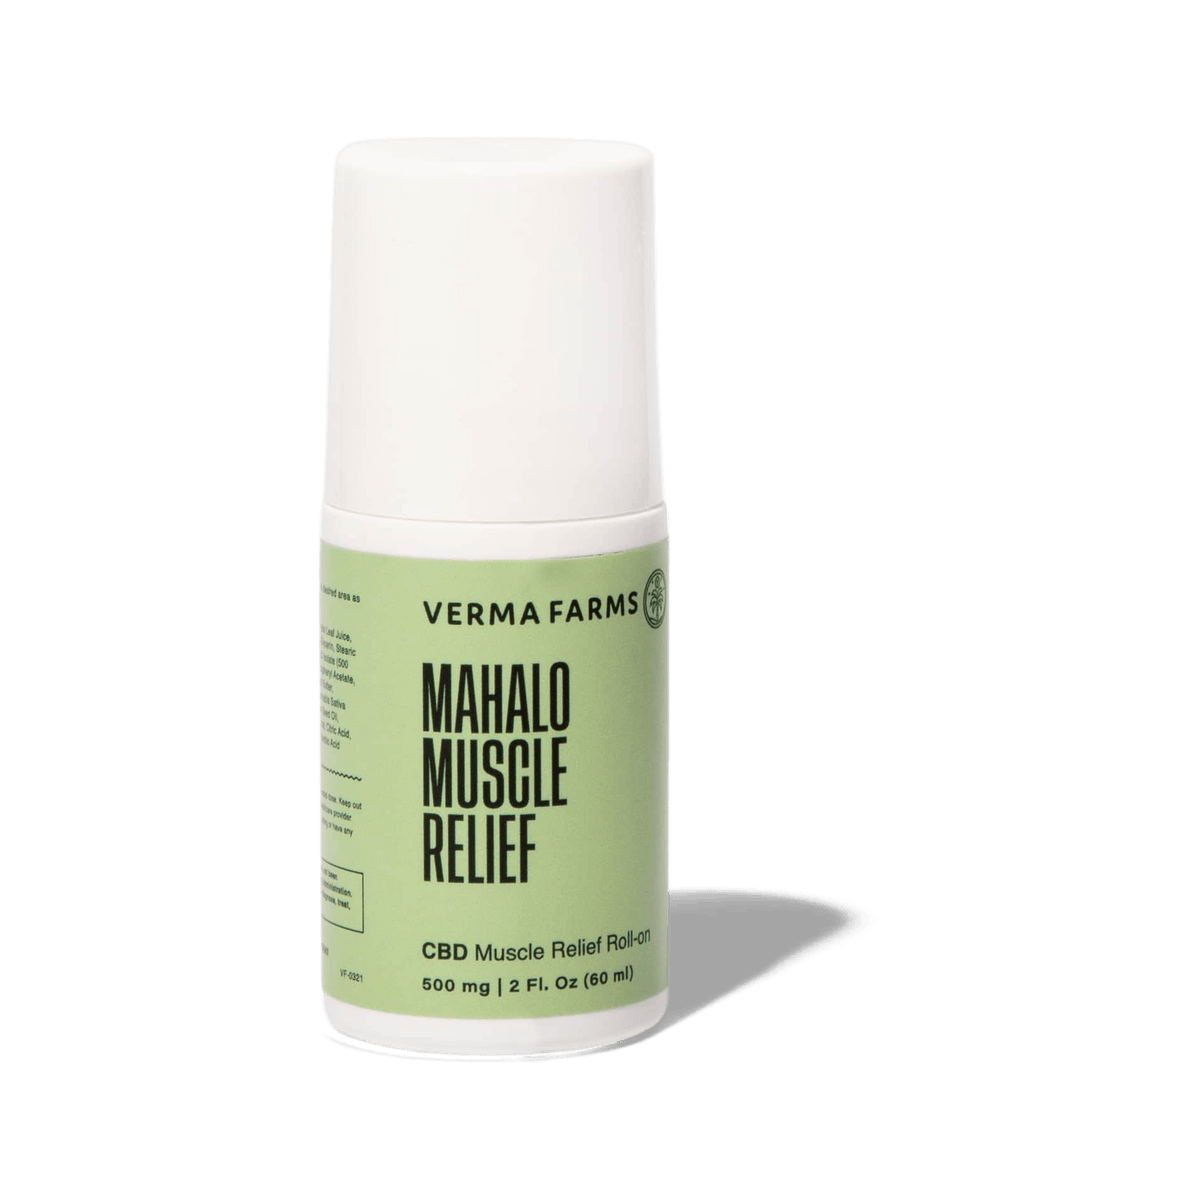 » FREE Mahalo Muscle Relief (worth $59.99)